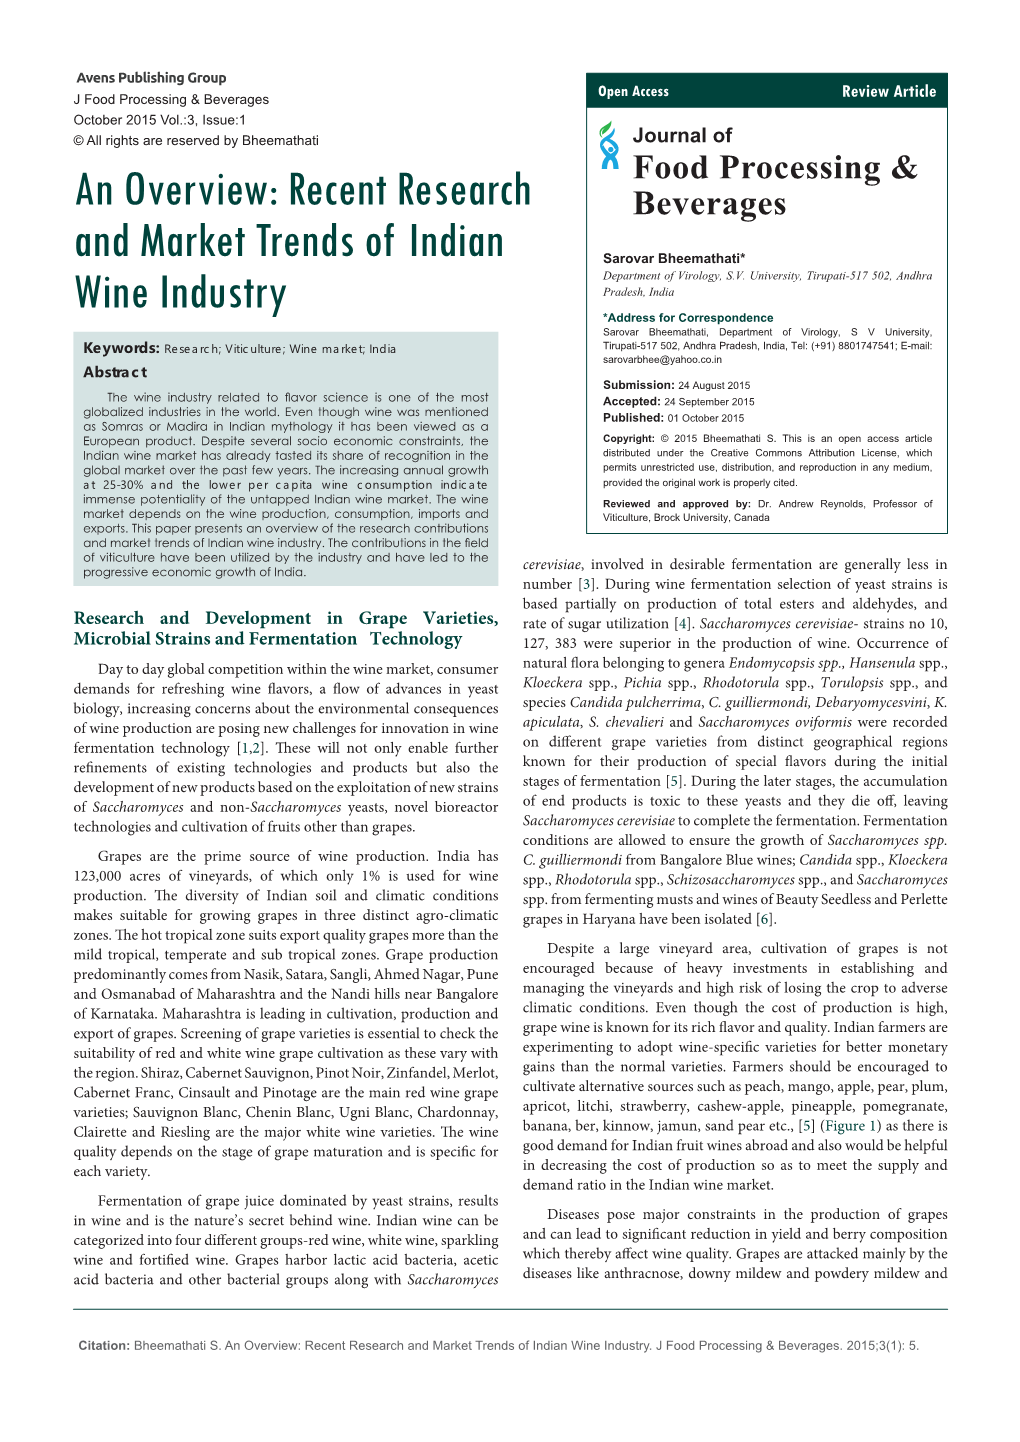 An Overview: Recent Research and Market Trends of Indian Wine Industry